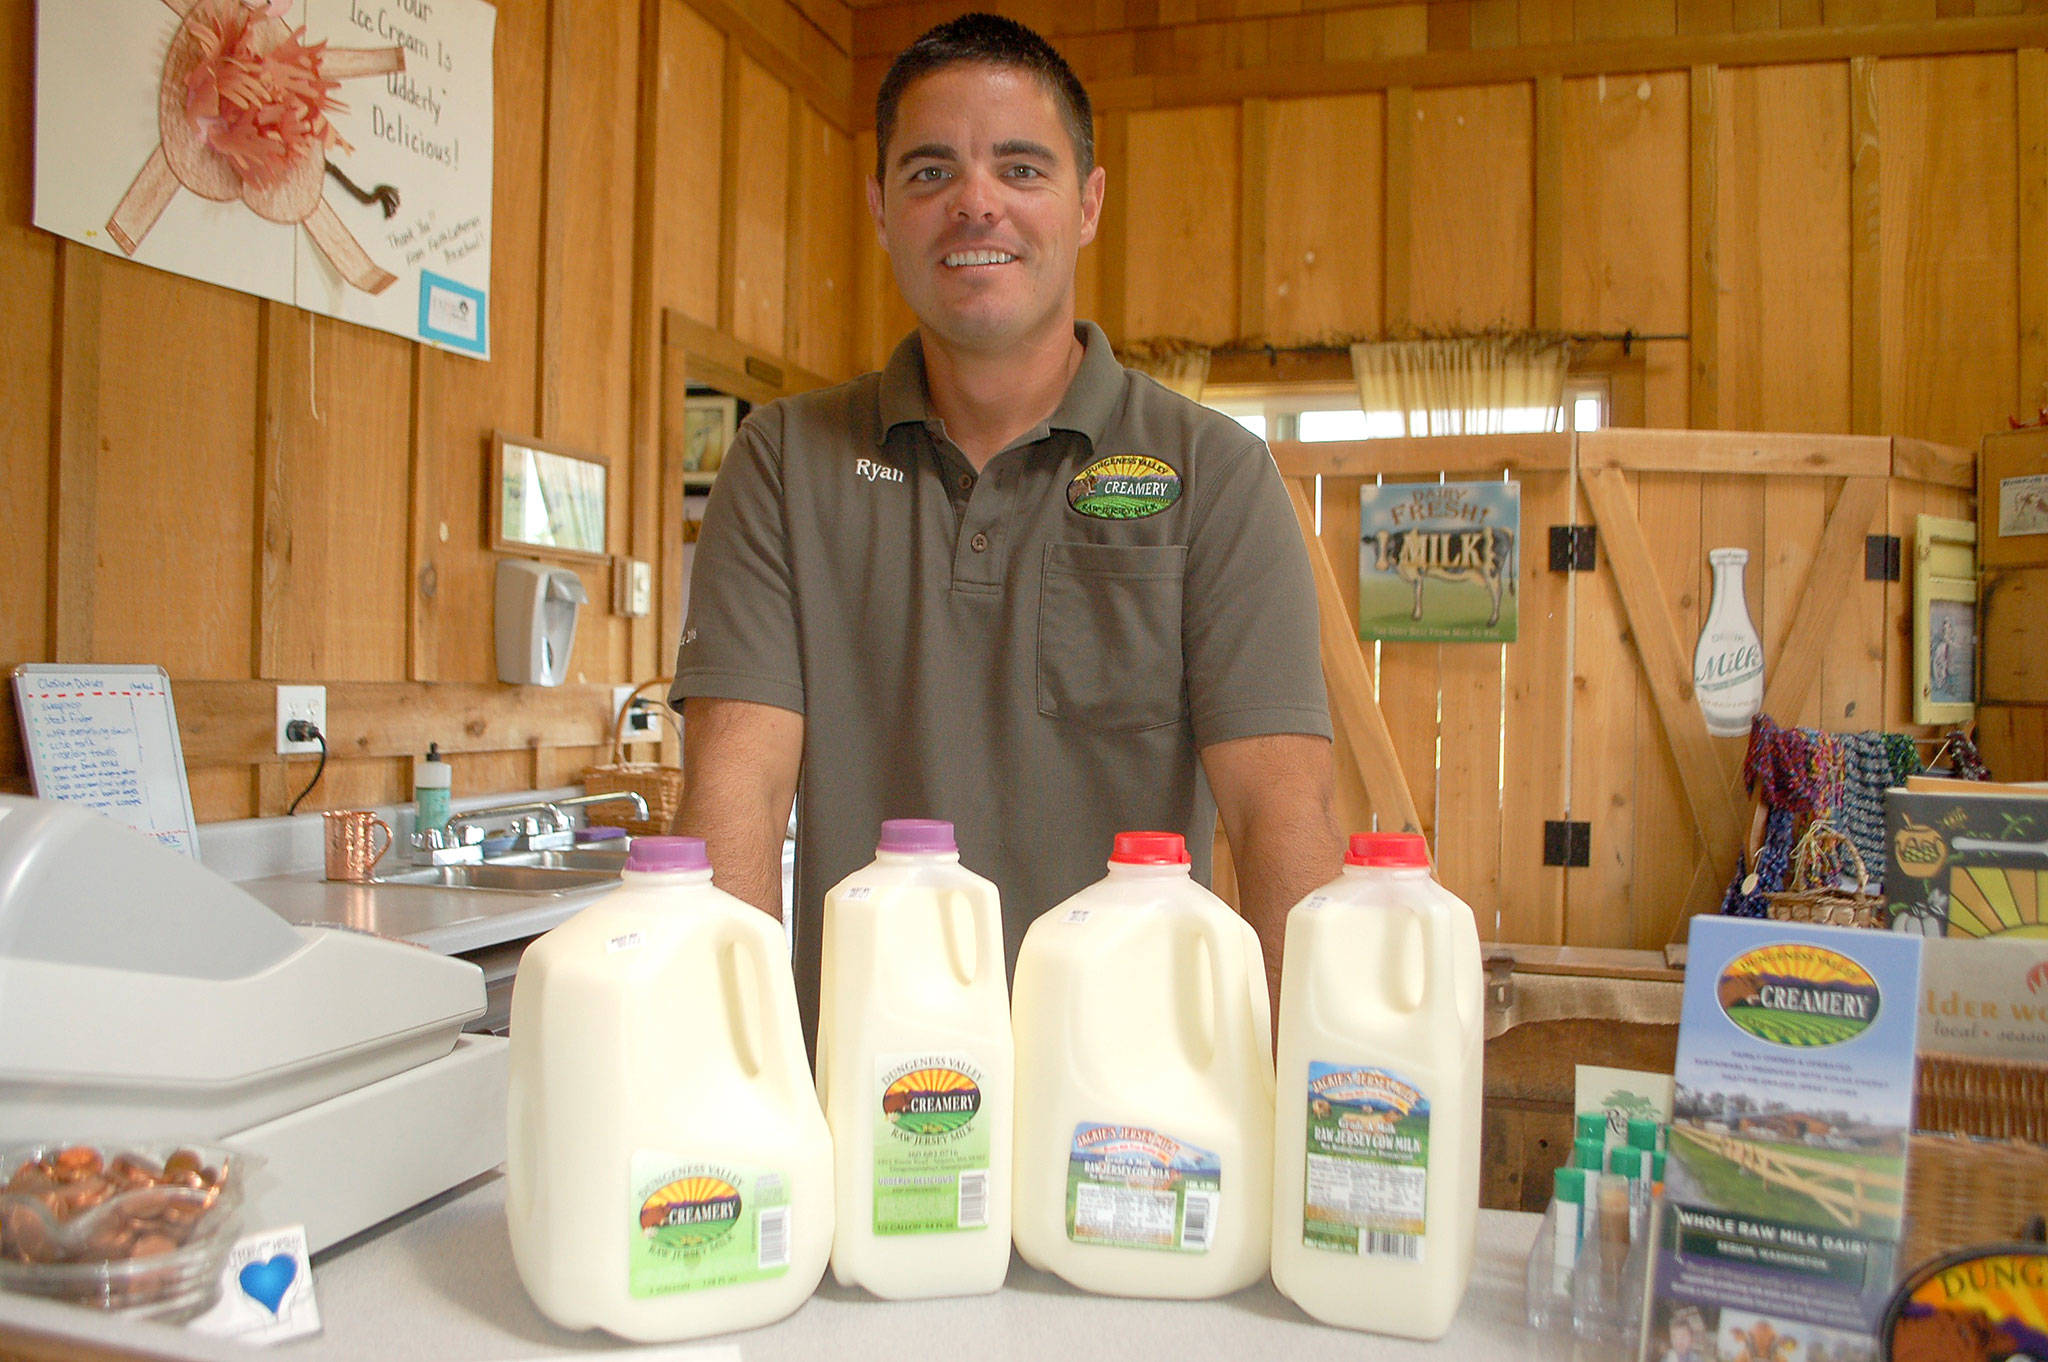 Ryan McCarthey, co-owner of Dungeness Valley Creamery, stands with cartons of Dungeness Valley Creamery whole raw milk and newly owned Jackie’s Jersey’s cartons after the companies merged Aug. 1. Sequim Gazette photo Erin Hawkins